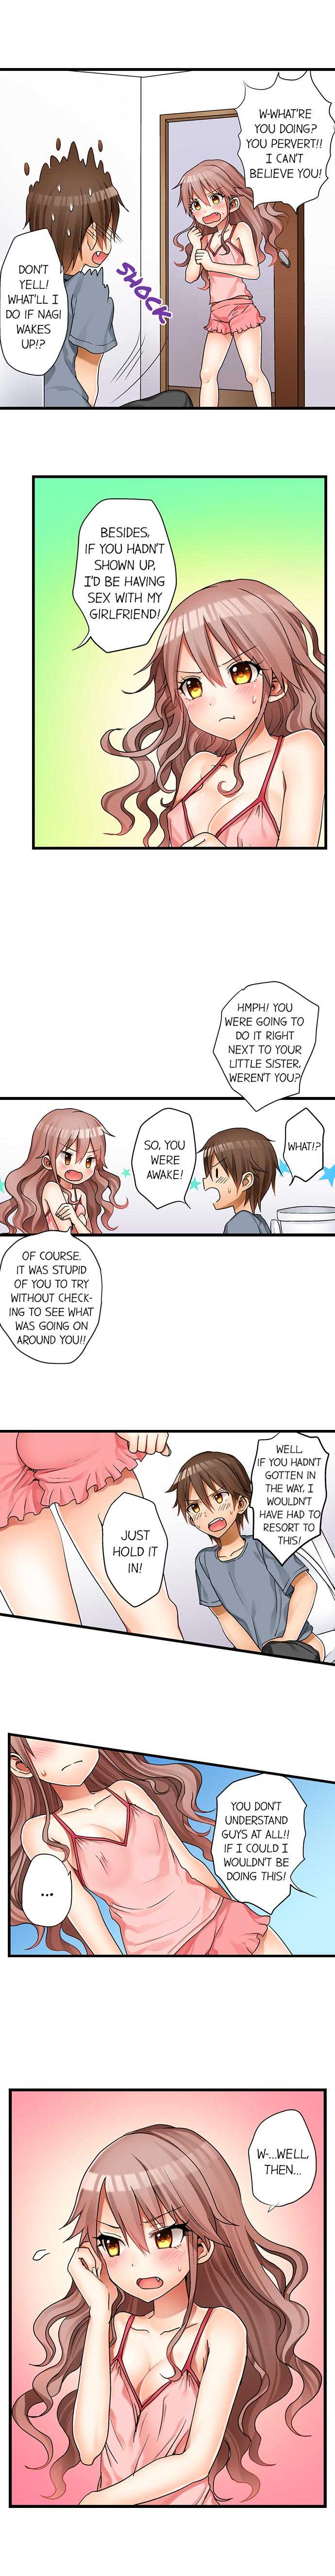 [Porori] Hatsuecchi no Aite wa... Imouto!? | My First Time is with.... My Little Sister?! Ch. 1-60 [English] [Ongoing] - Page 23